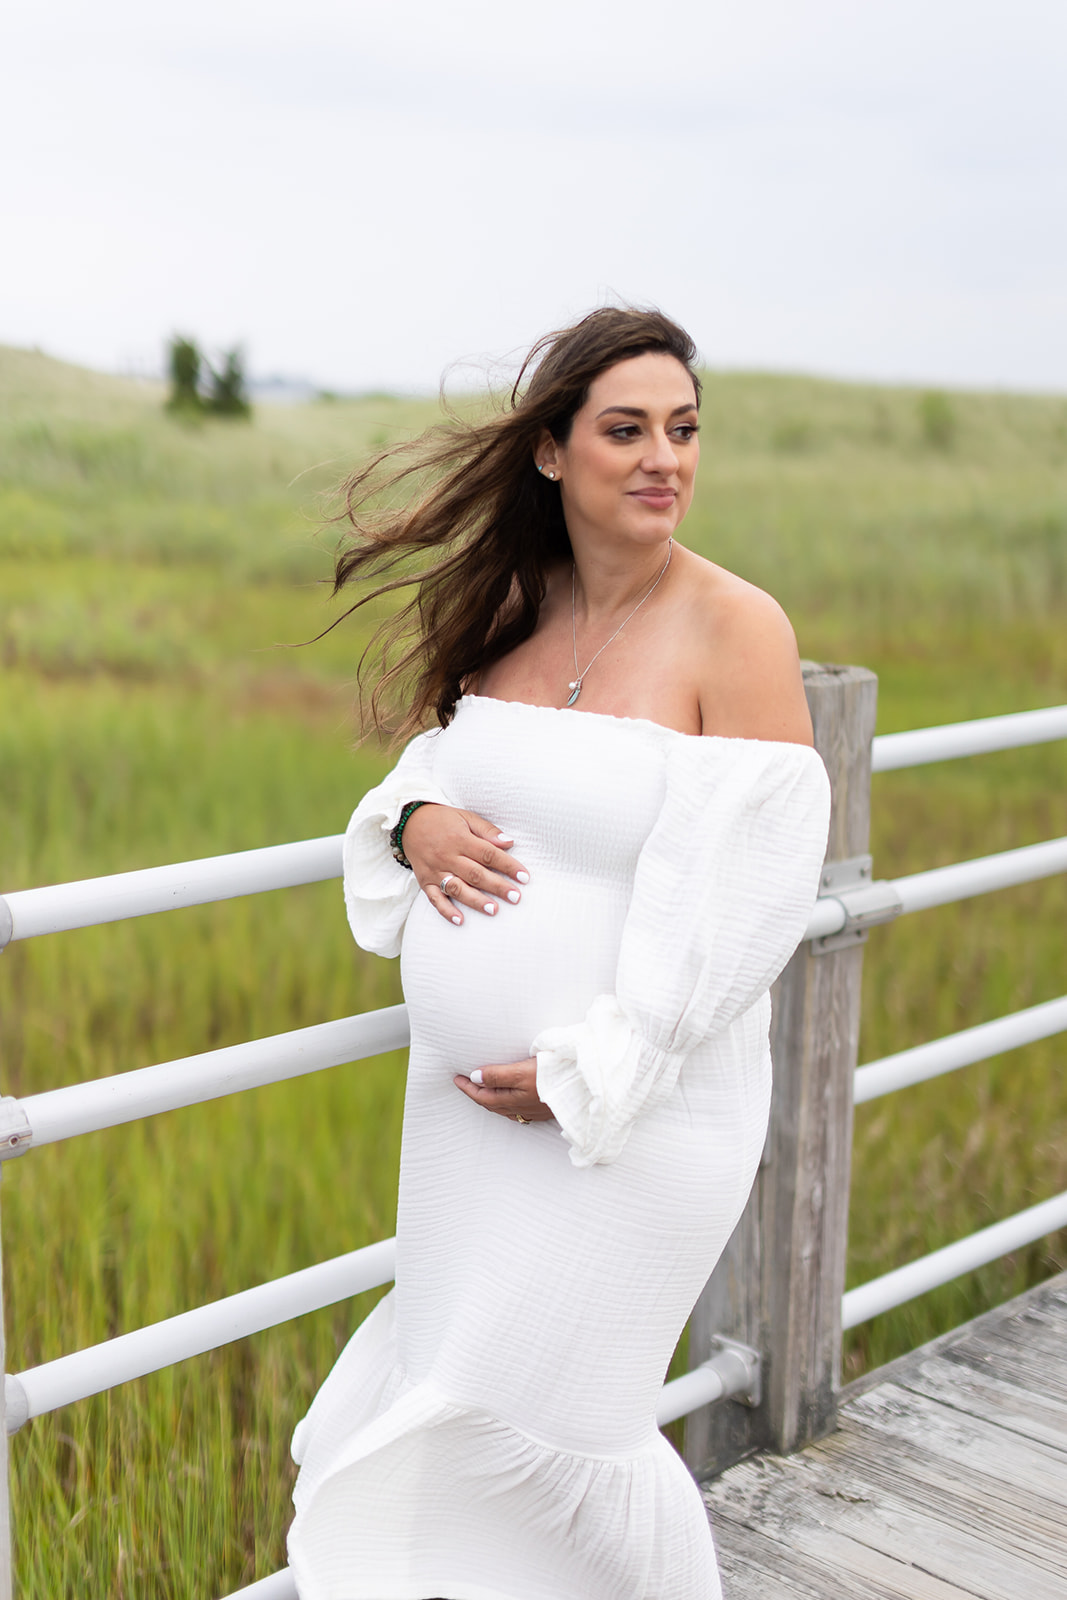 A pregnant woman in a white maternity gown smiles over her shoulder while walking on a windy boardwalk